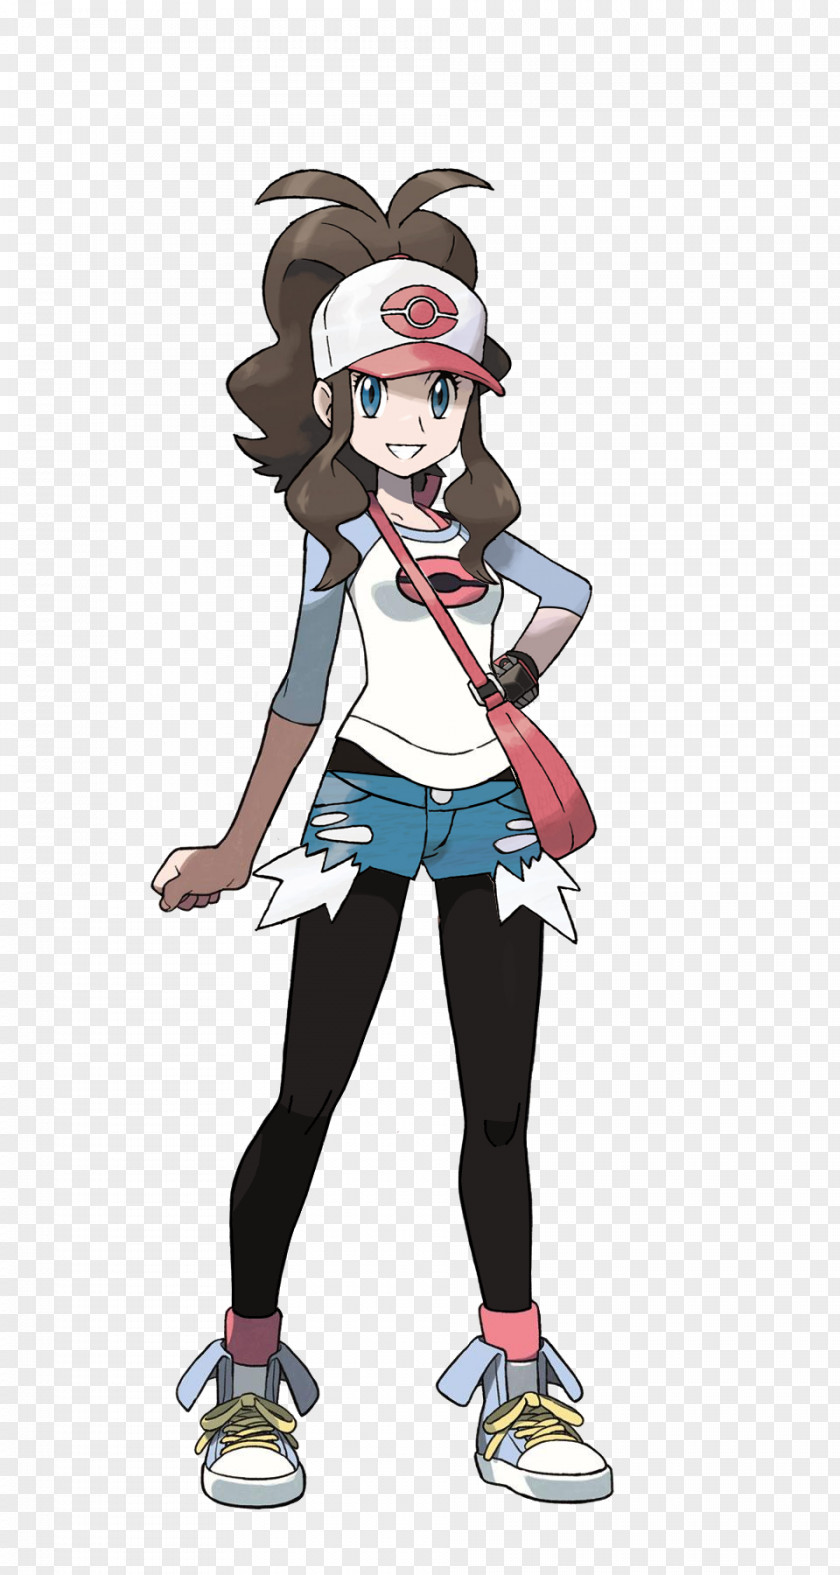 Pokémon Black 2 And White Pokemon & Omega Ruby Alpha Sapphire Crystal Trainer PNG